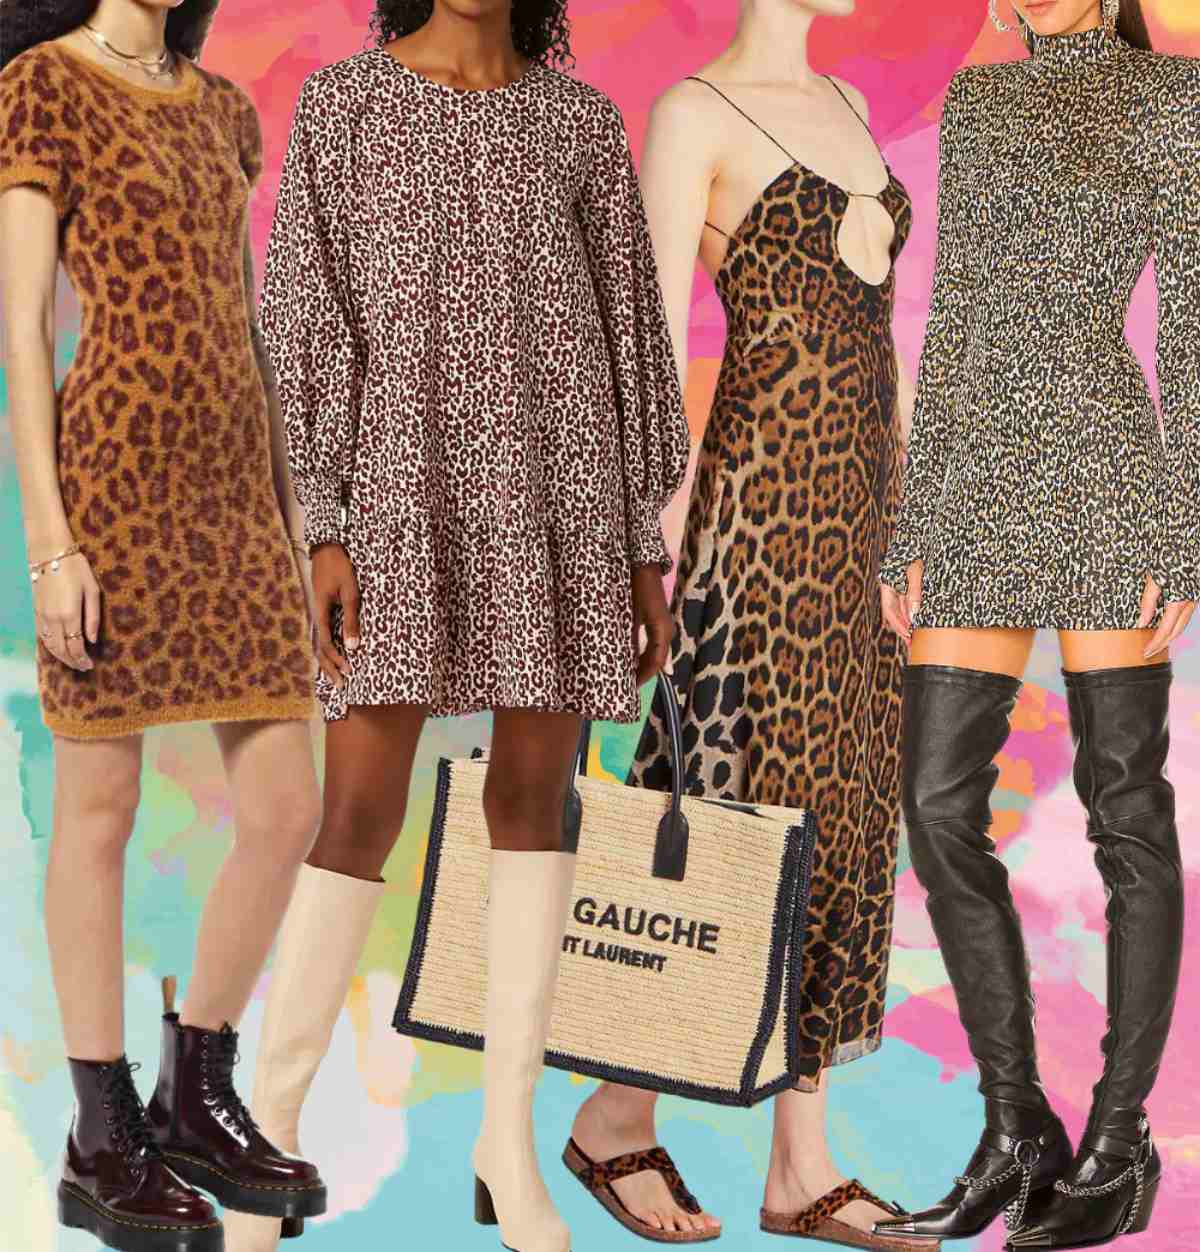 3 women wearing different shoes with casual leopard print dress outfits.